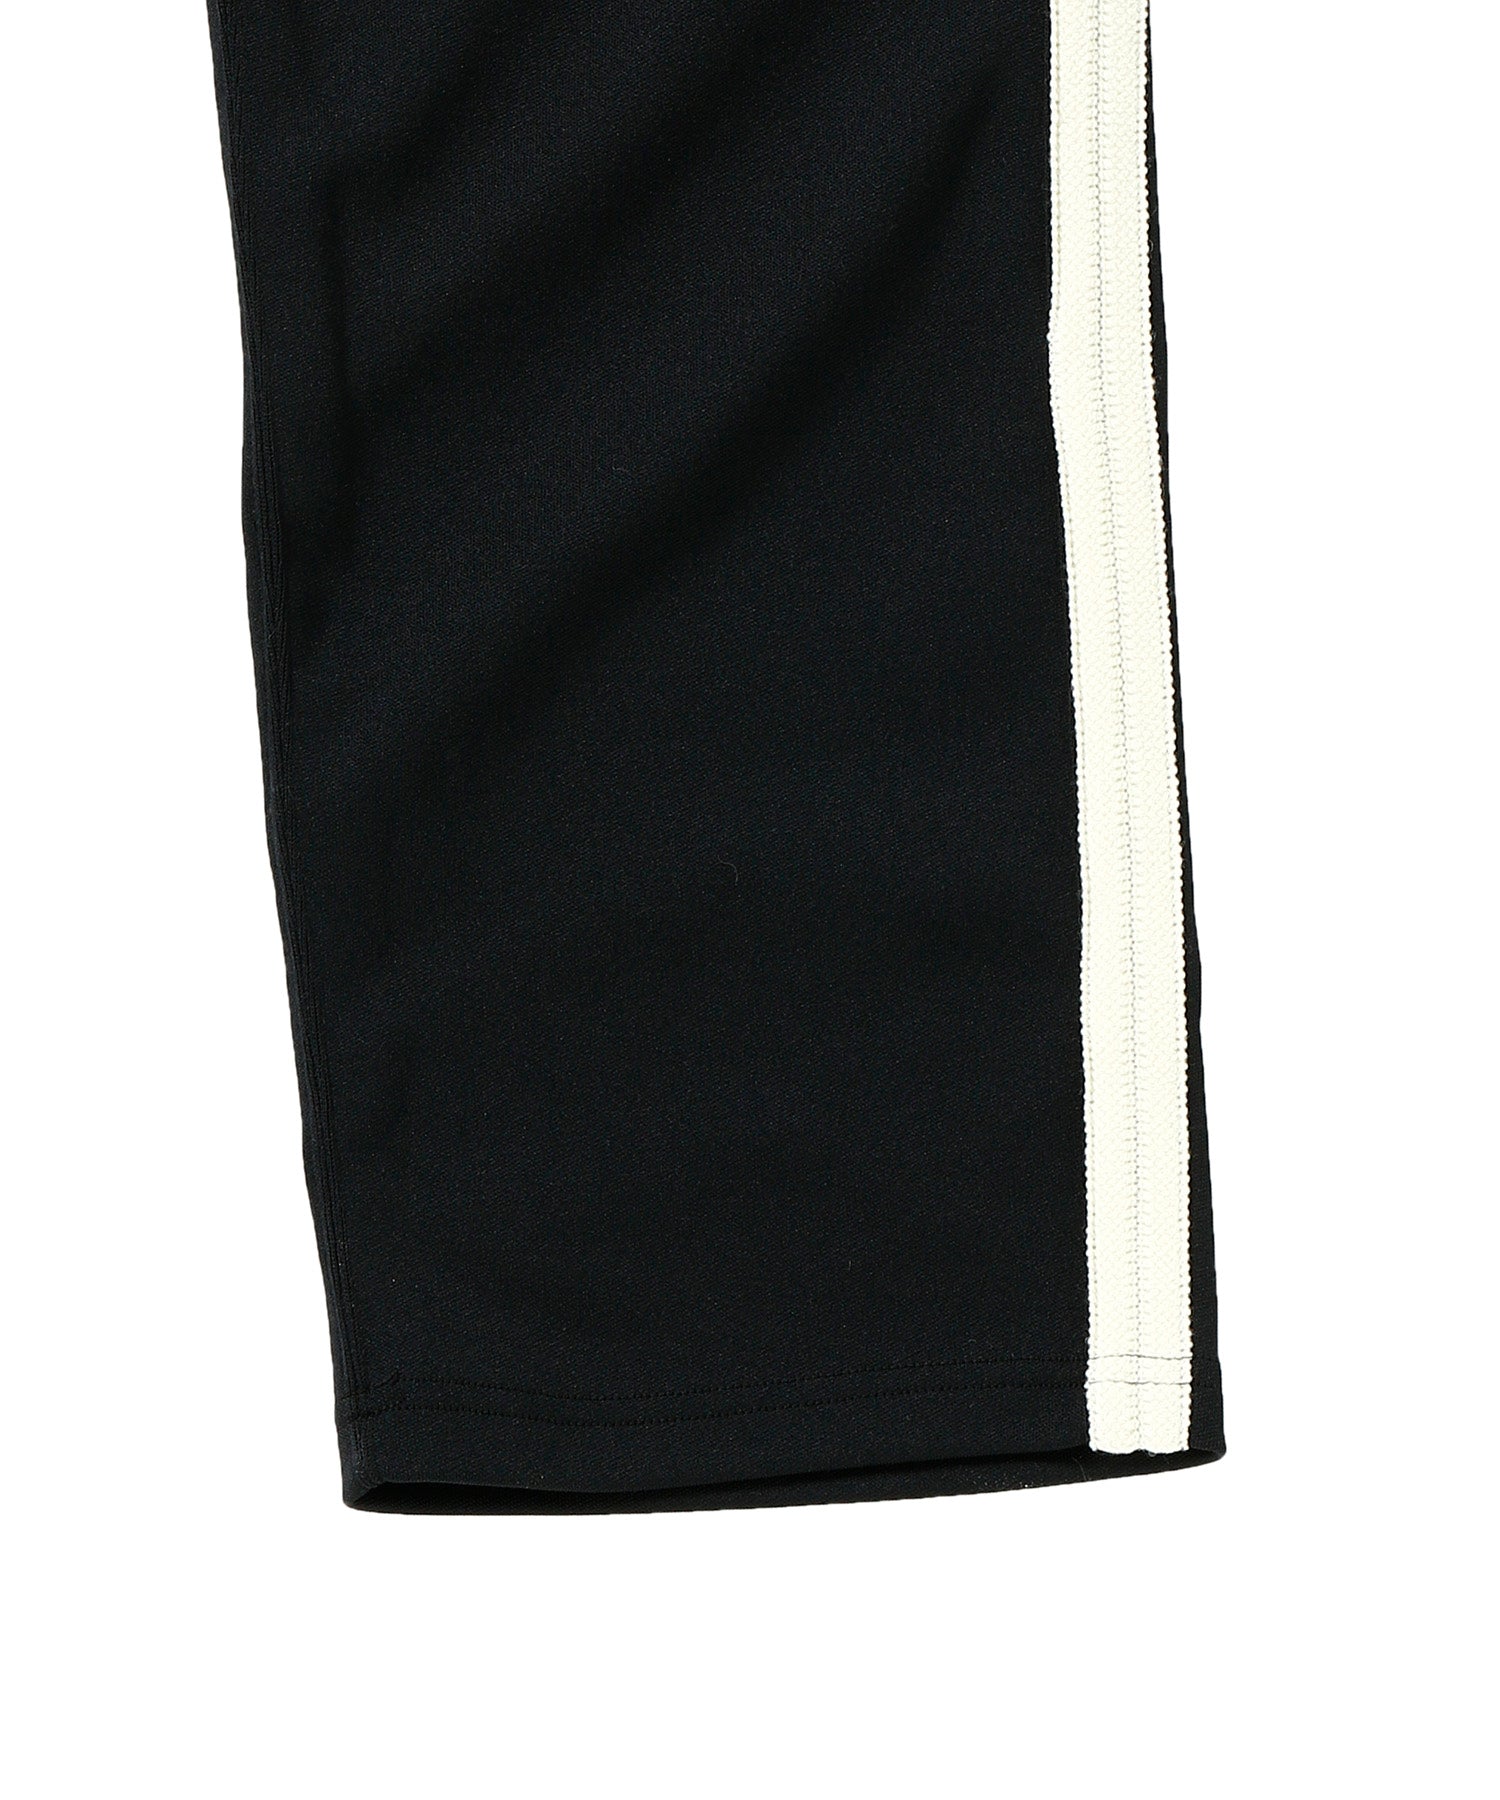 COACH EASY PANTS POLY JERSEY